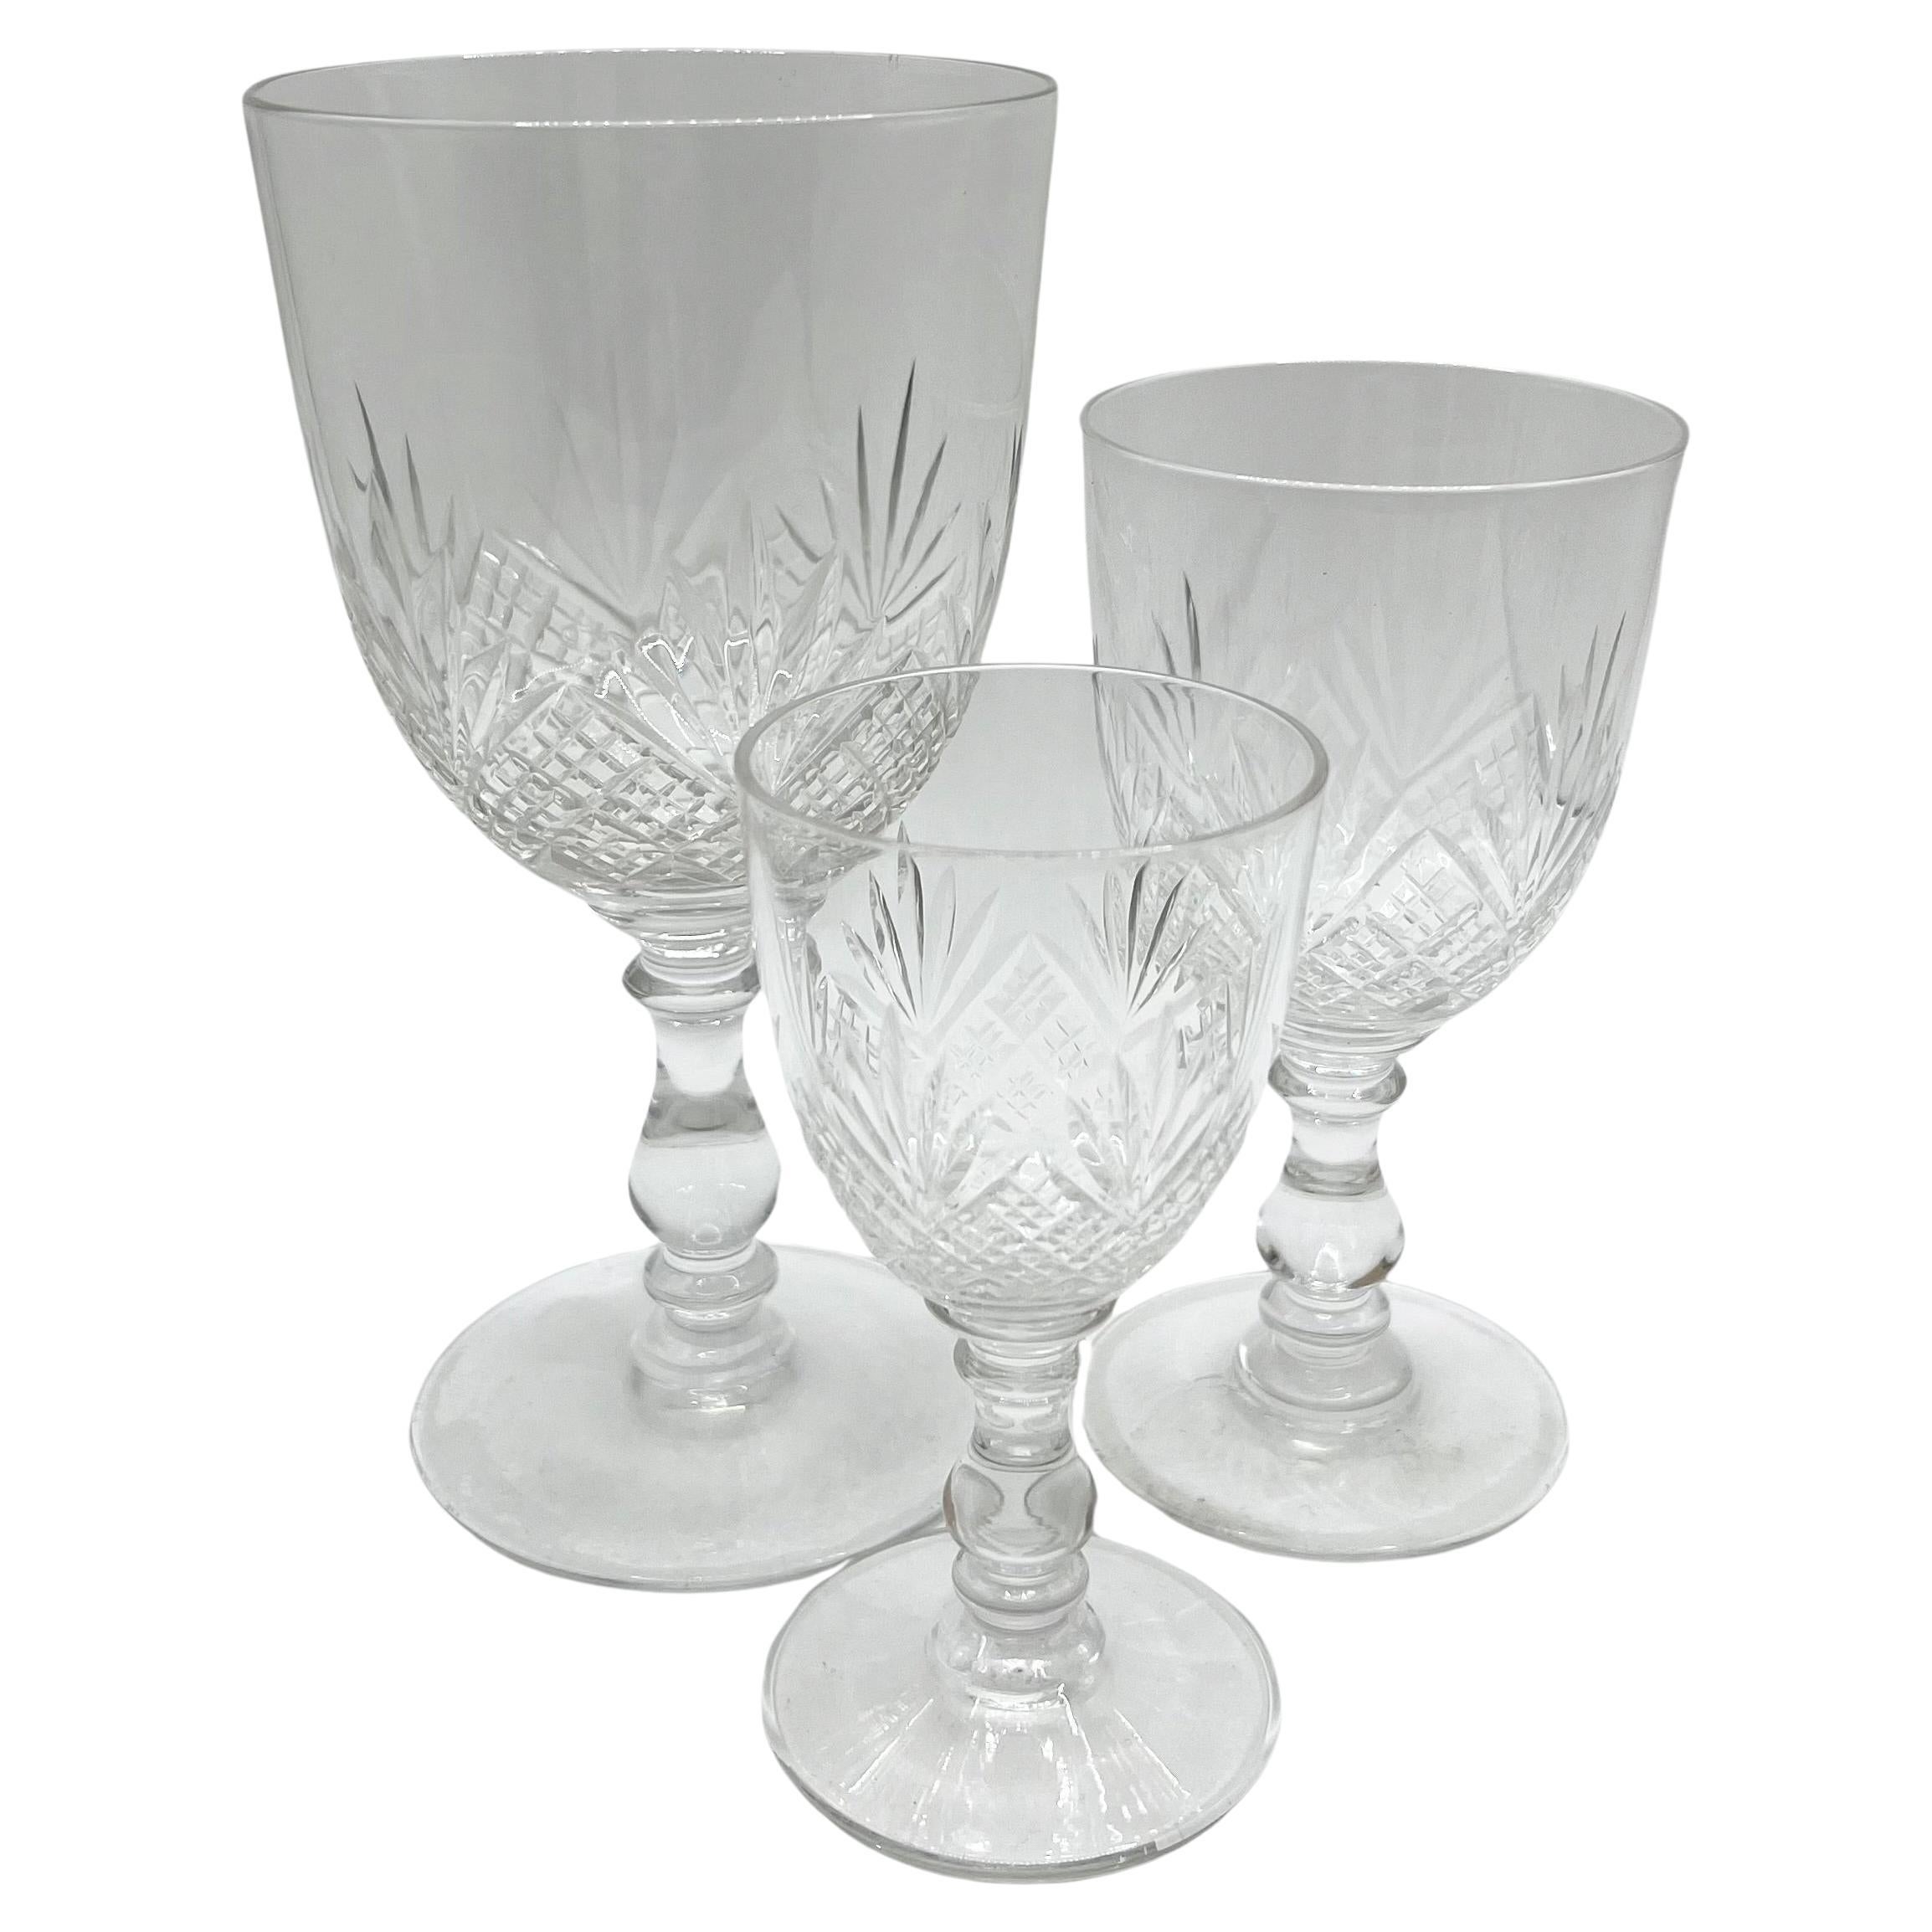 French antique set of 3 Baccarat crystal glasses - France - Douai model For Sale